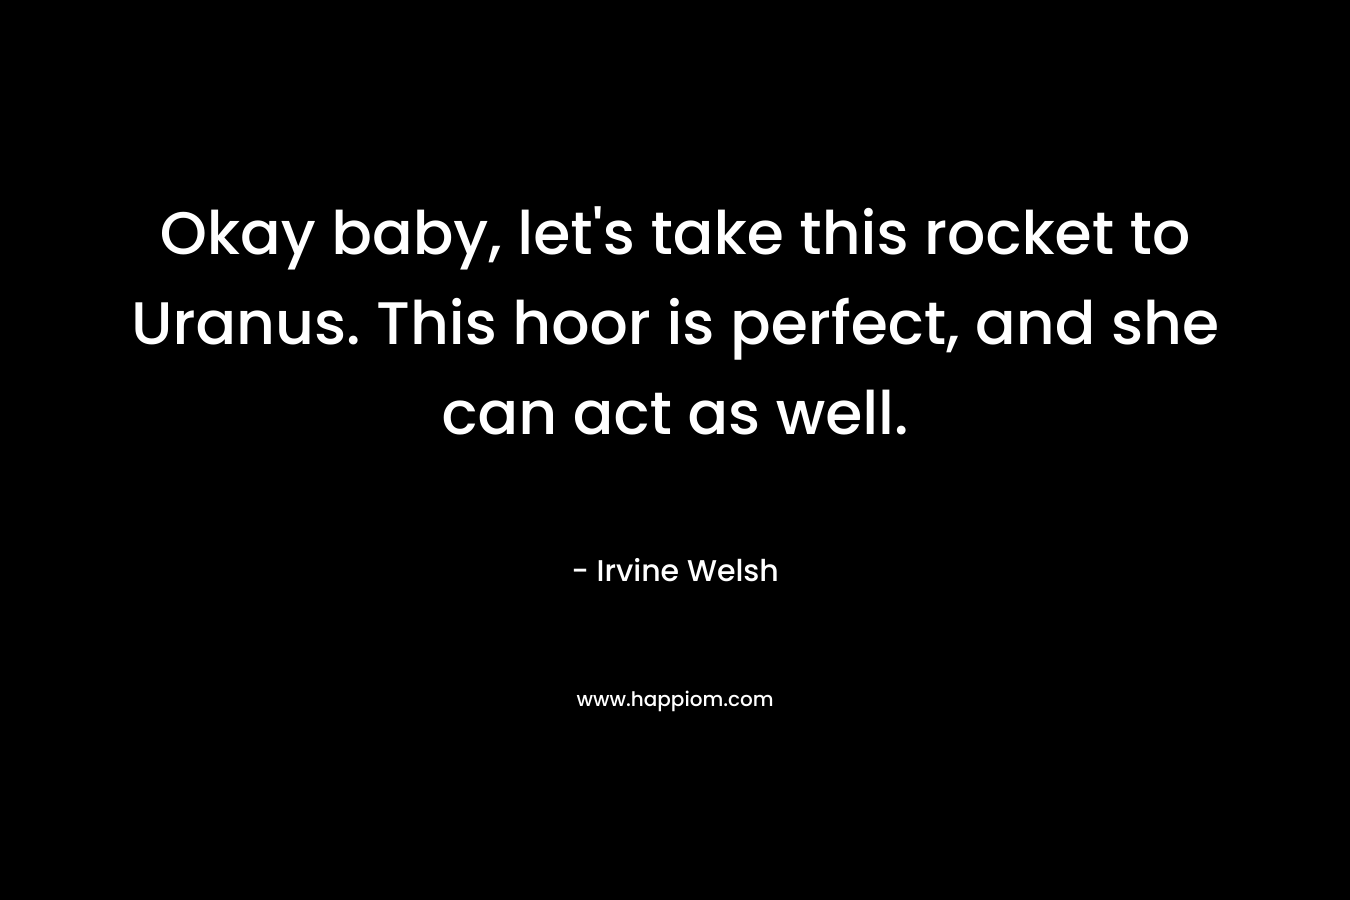 Okay baby, let's take this rocket to Uranus. This hoor is perfect, and she can act as well.